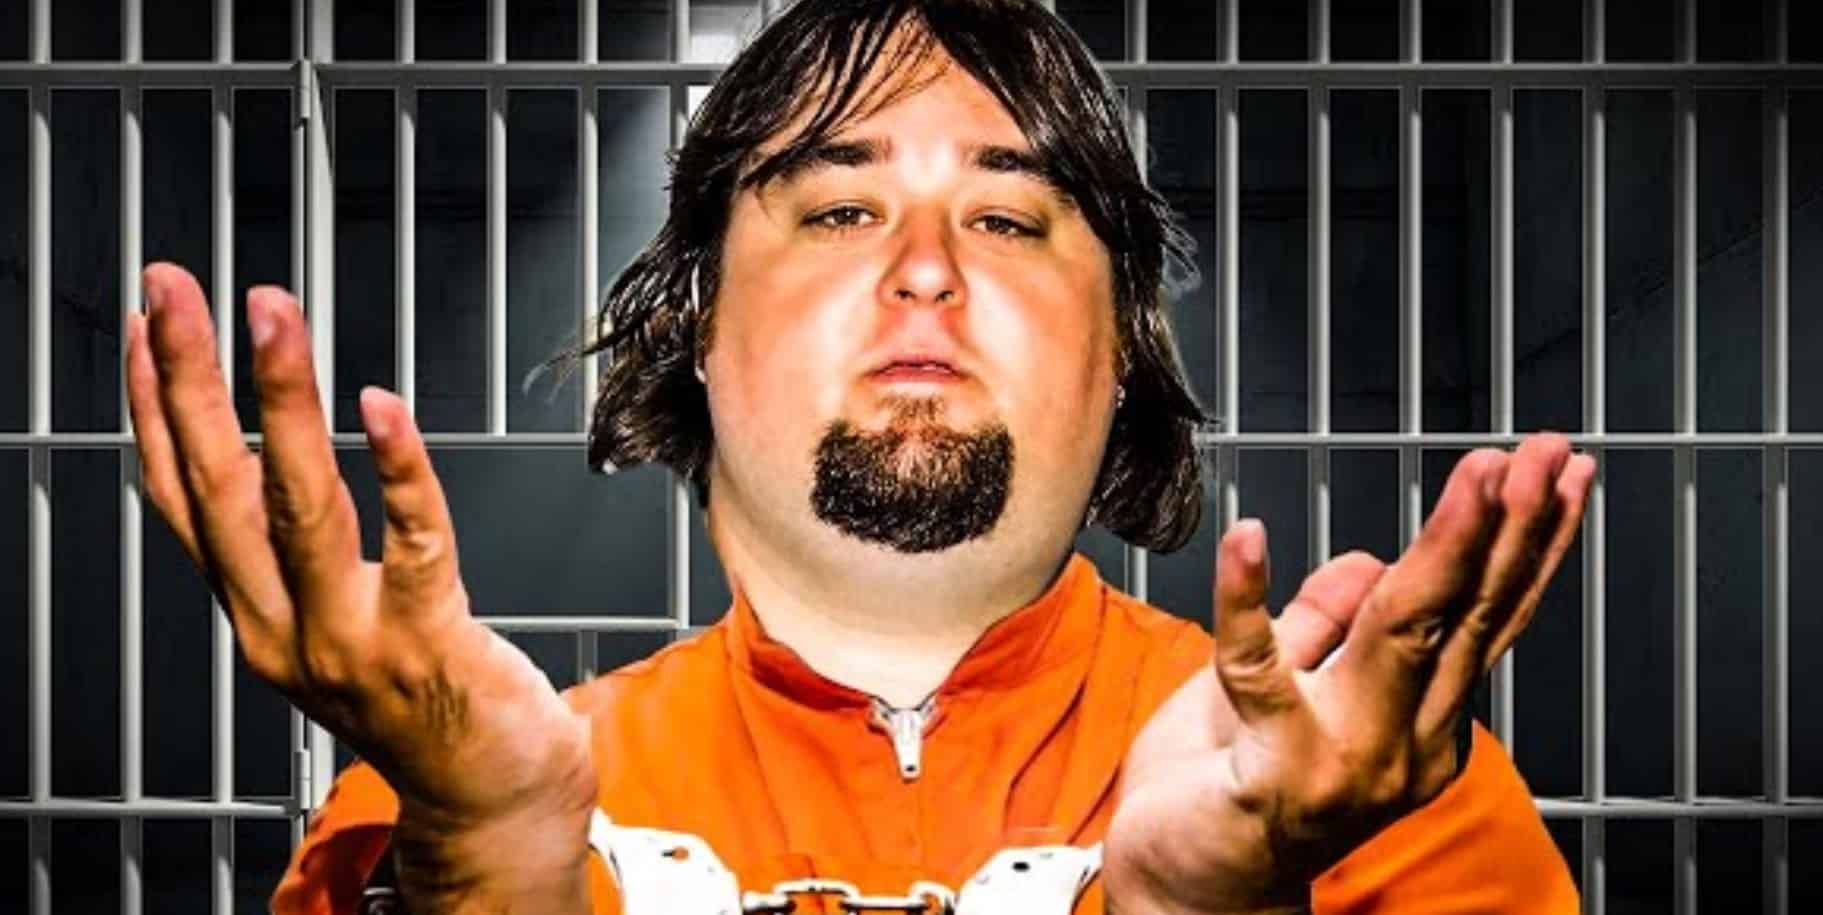 What Happened to Chumlee on Pawn Stars